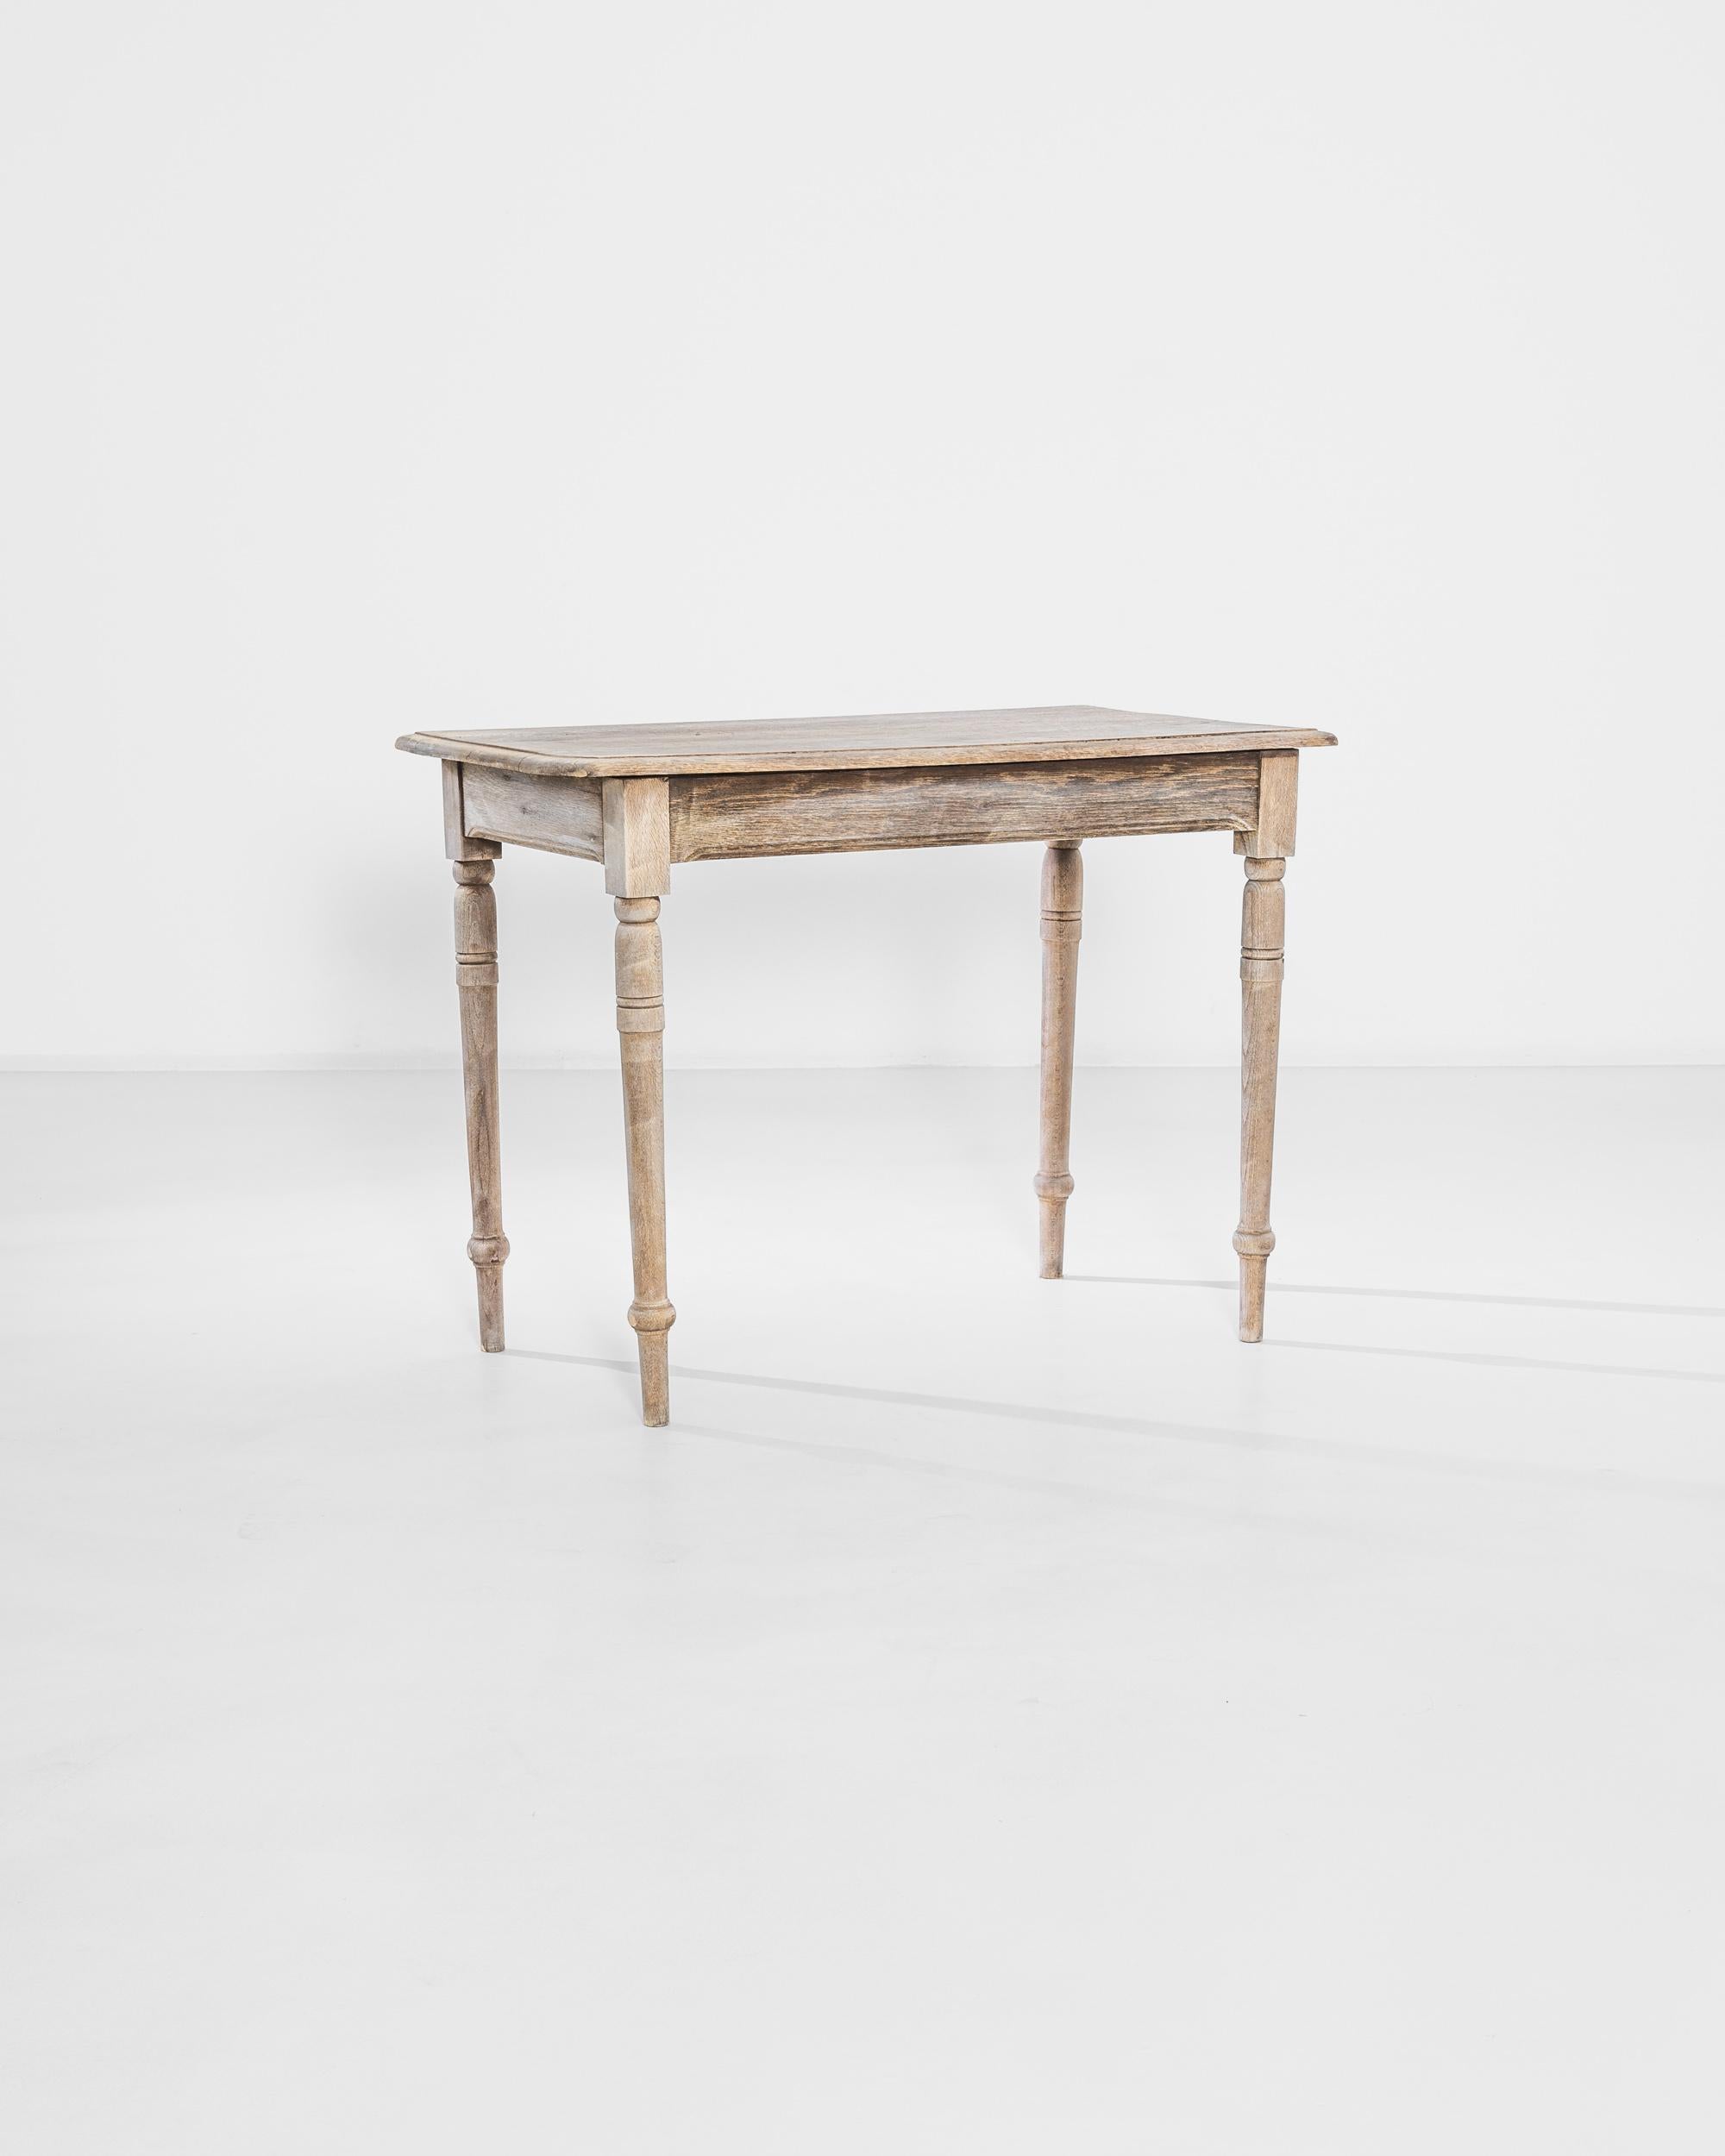 A regal bleached oak table, circa 1920 France. Featuring a hand-planed top, a chiseled apron, and lathed legs, this table displays a restrained and masterful work of craft. Its warm bleached oak makes it easy for this table to both fit in and stand